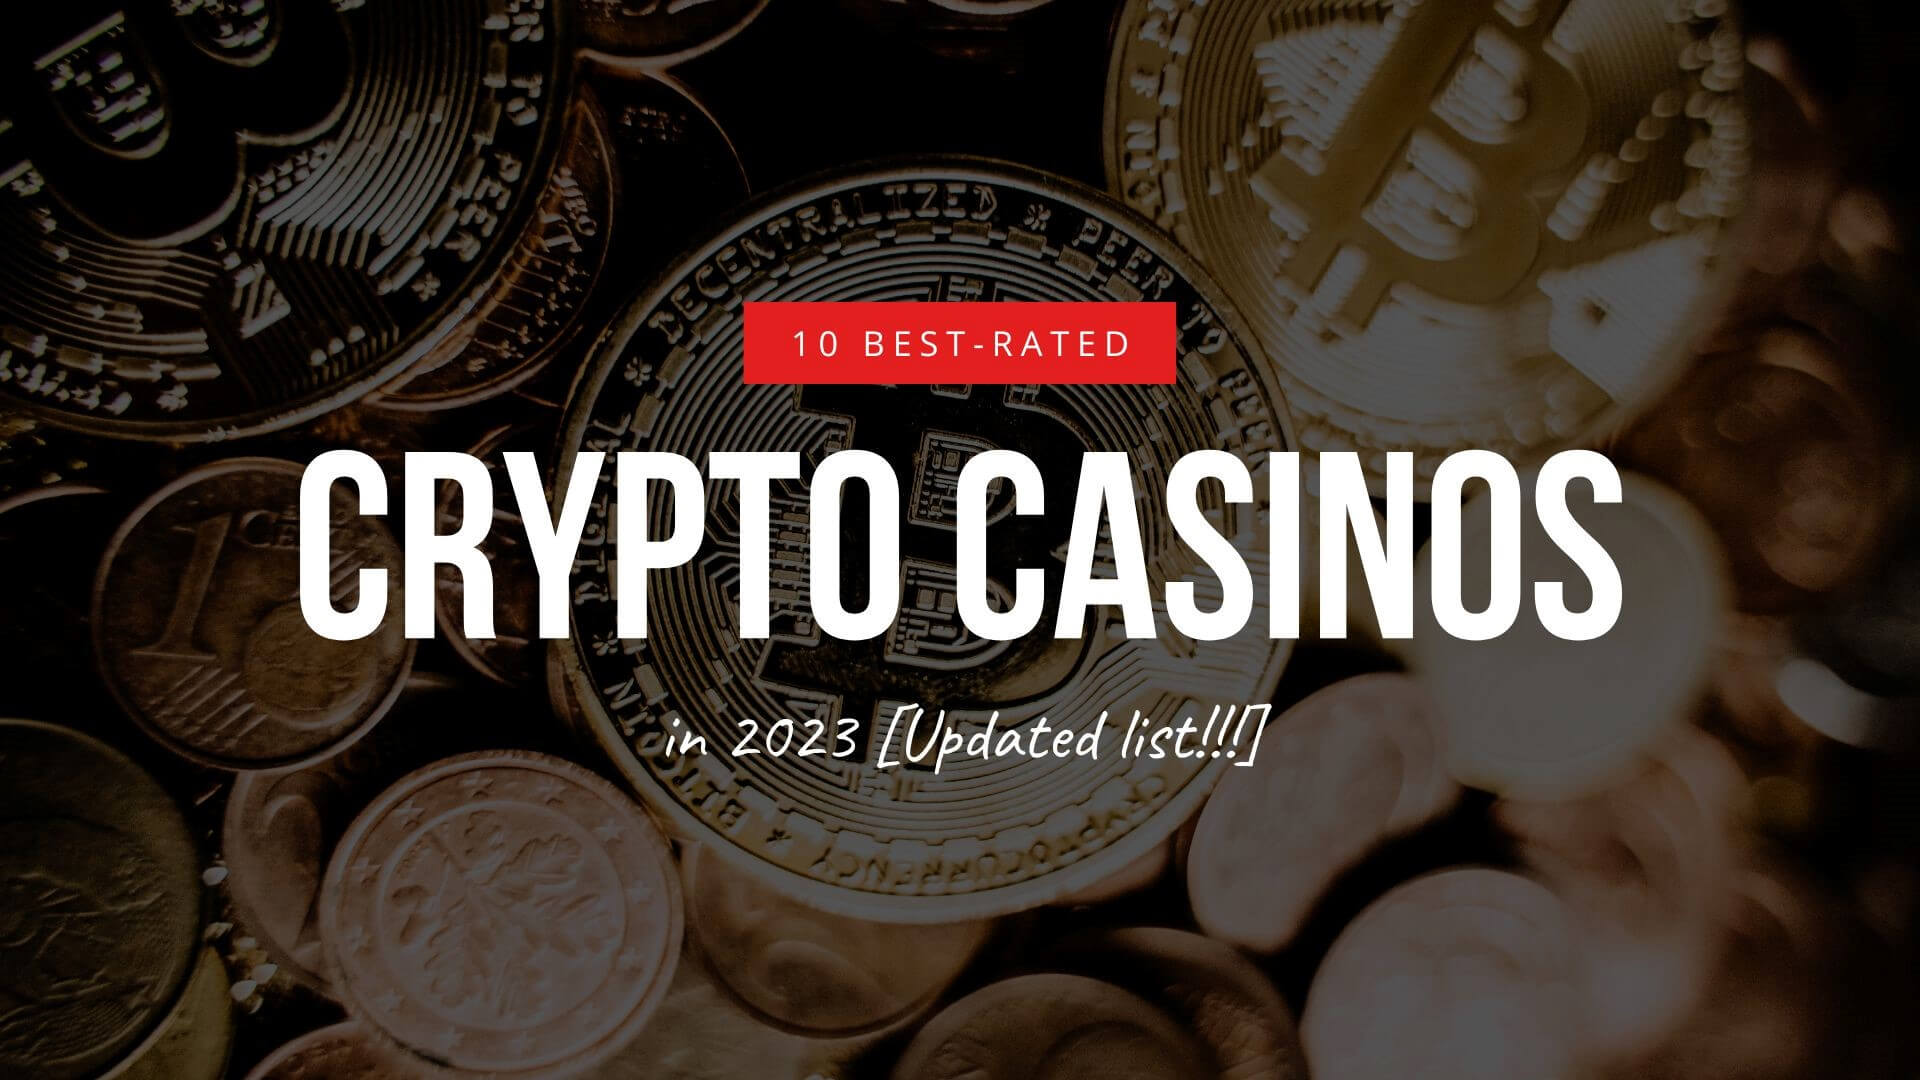 Now You Can Have Your crypto casino guides Done Safely